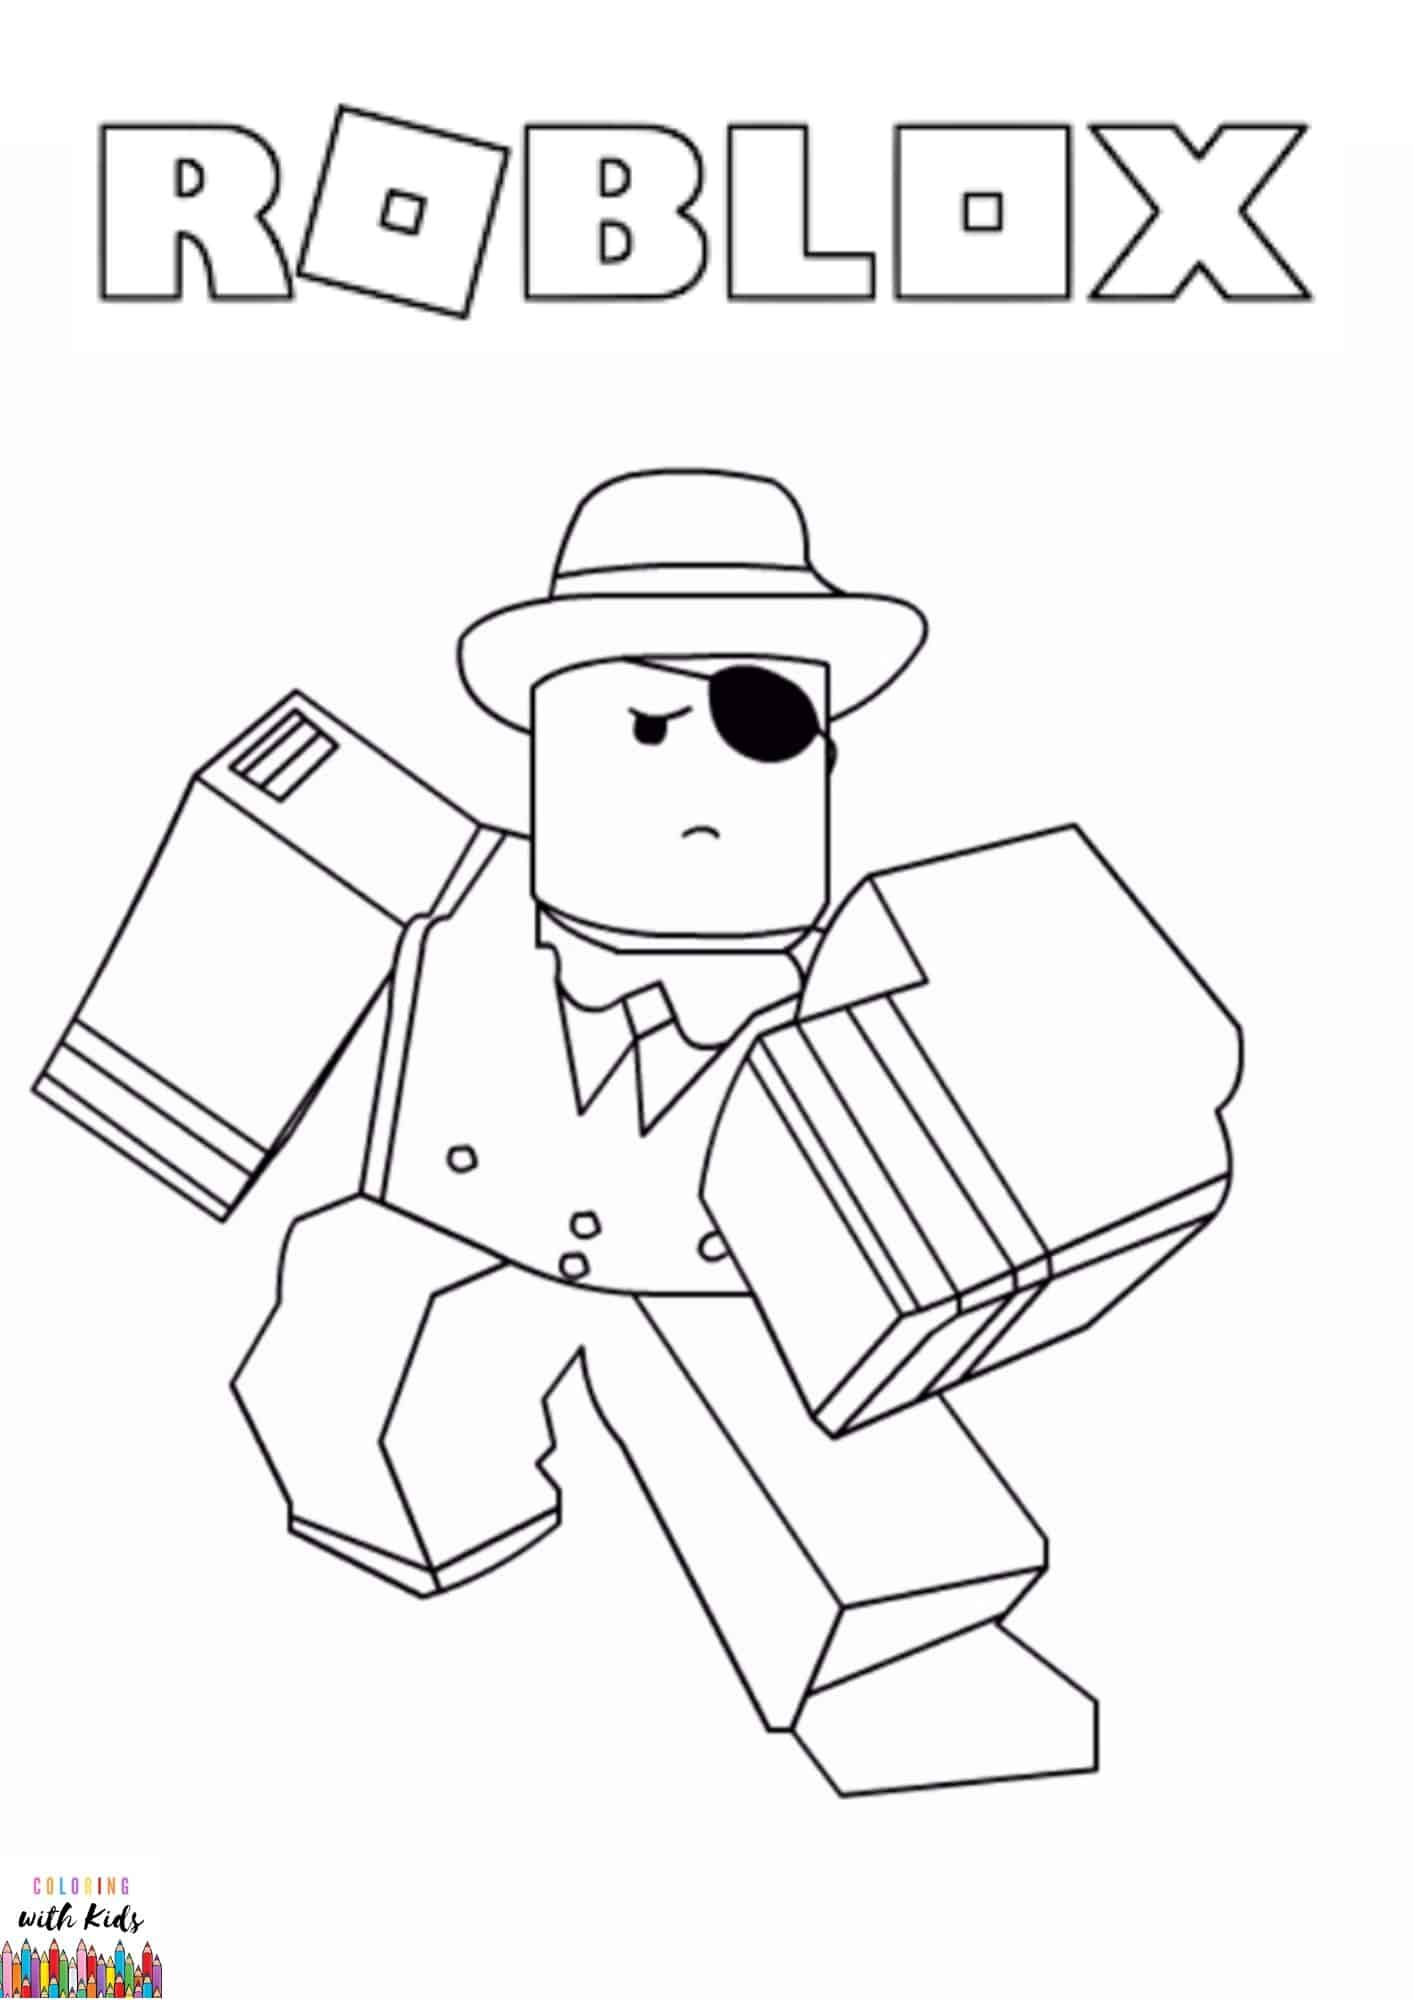 Roblox Coloring Pages   Coloring Home